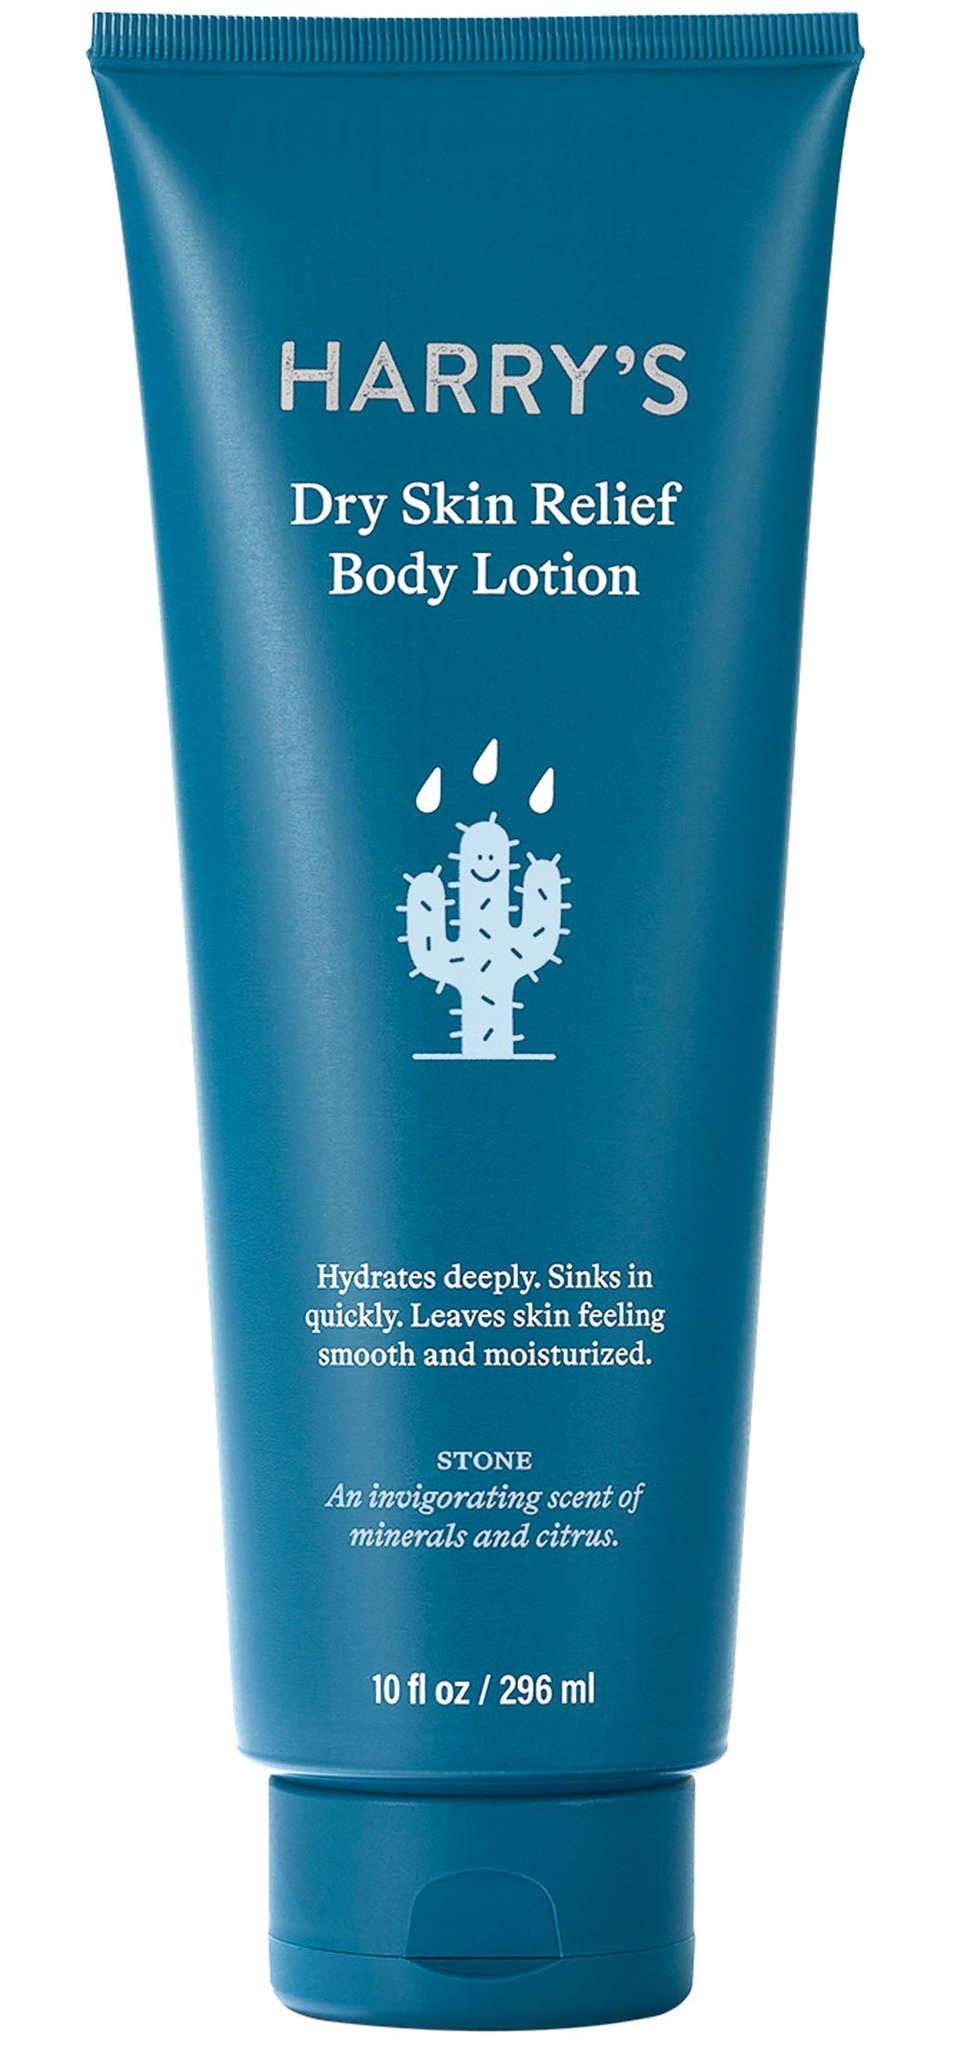 Harry’s Dry Skin Relief Body Lotion